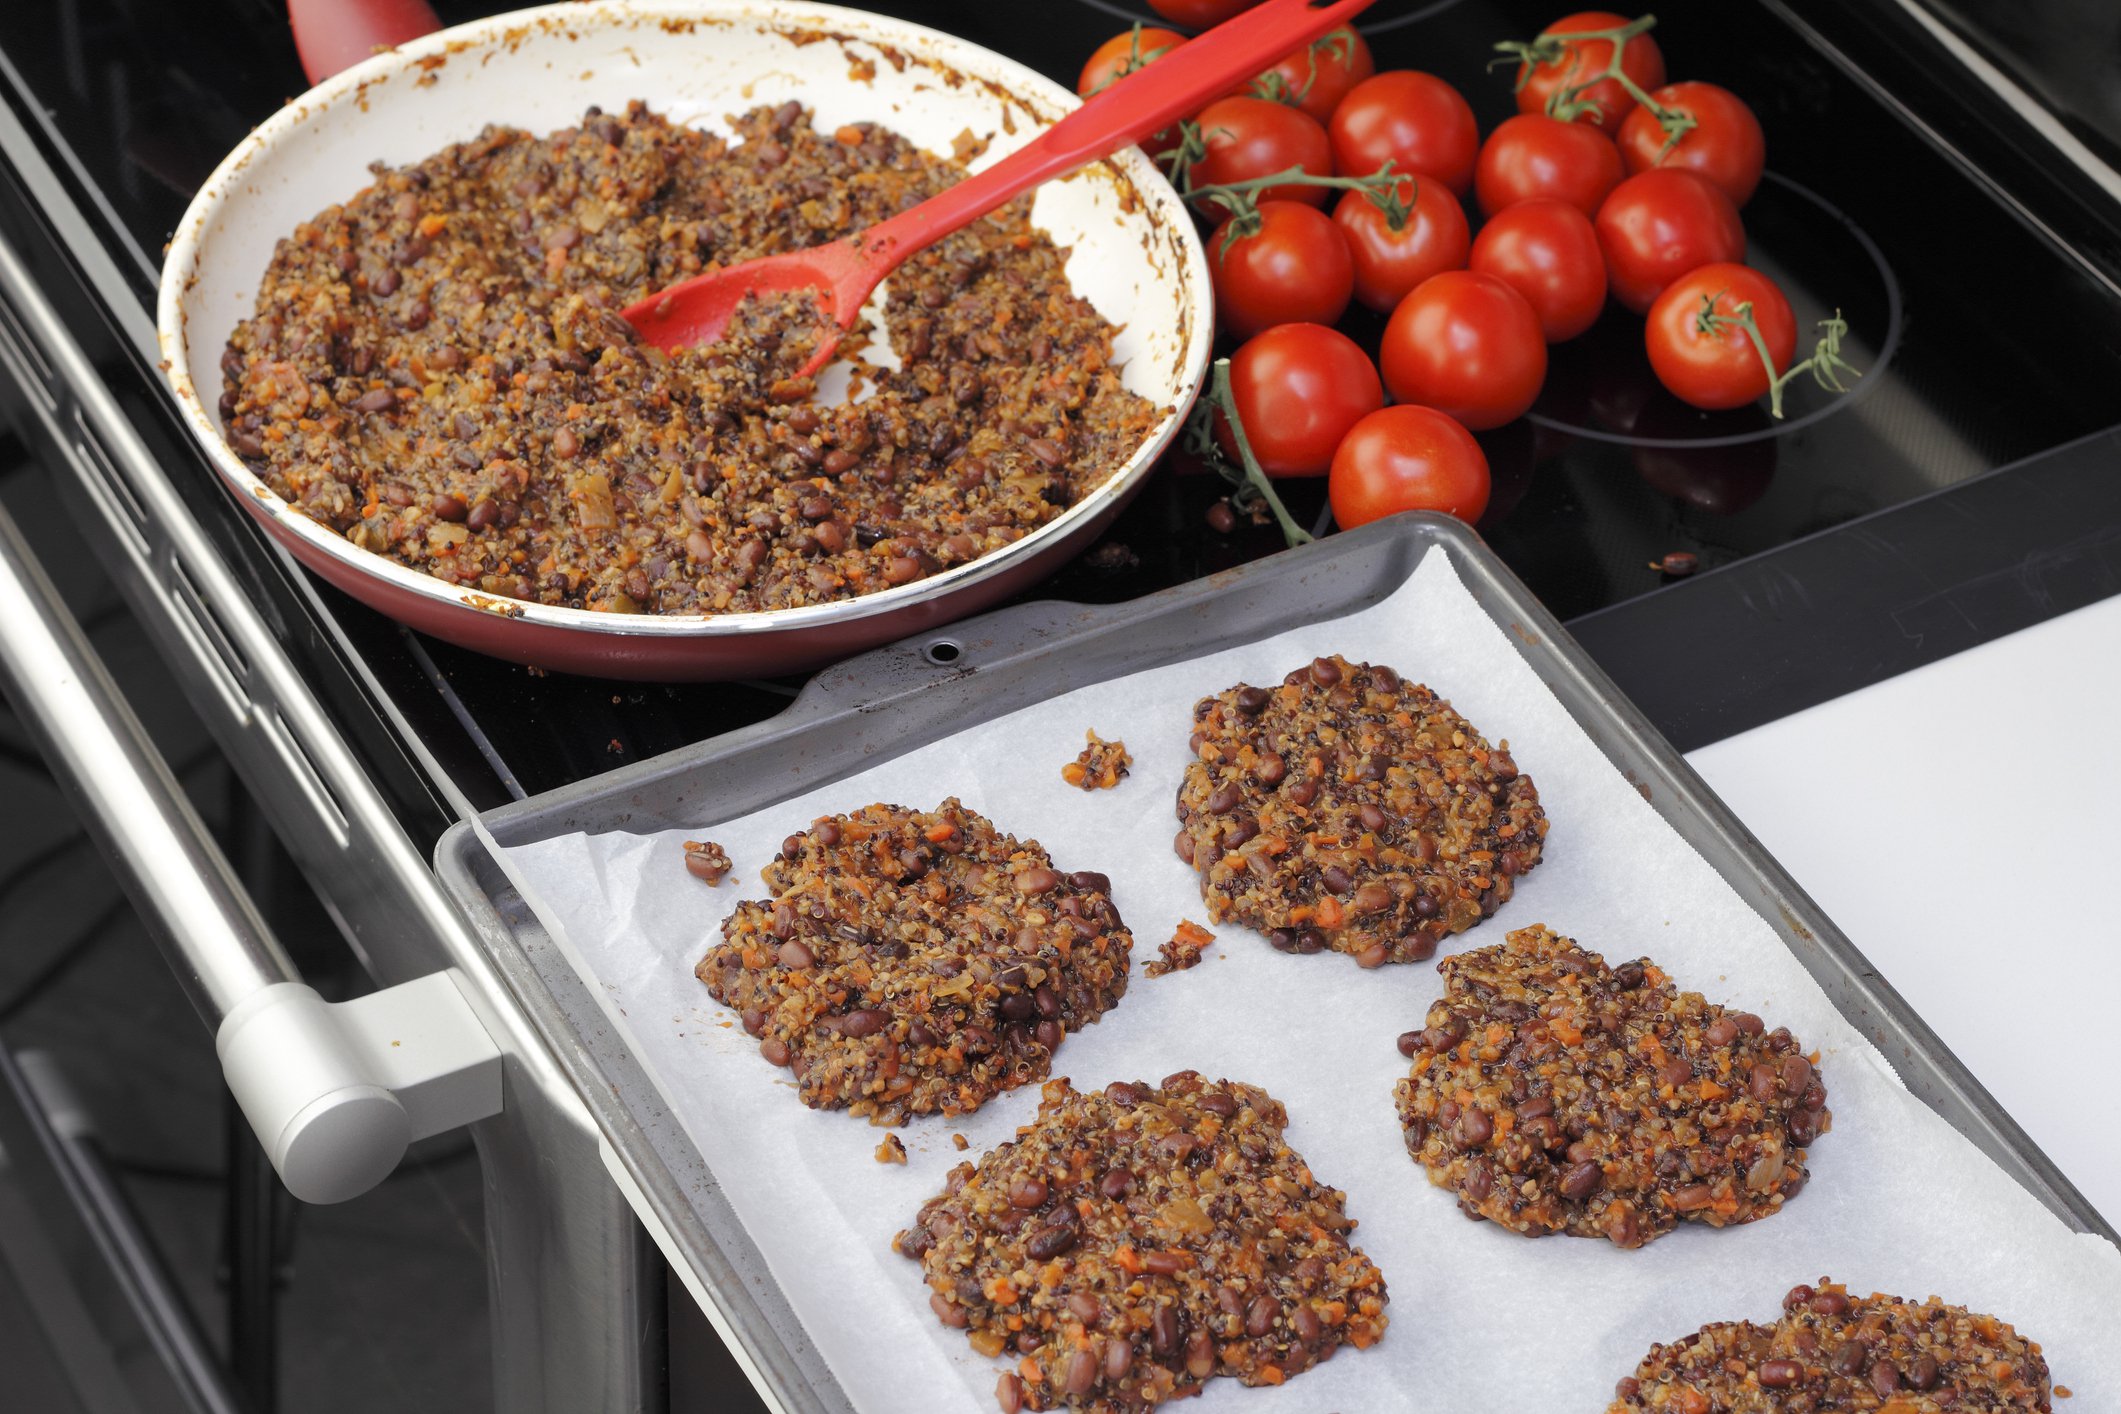 Parchment paper lined cookie sheet with quinoa and three bean veggie burgers ready to be cooked. Preparing tricolor bean and quinoa burgers recipe in the kitchen.